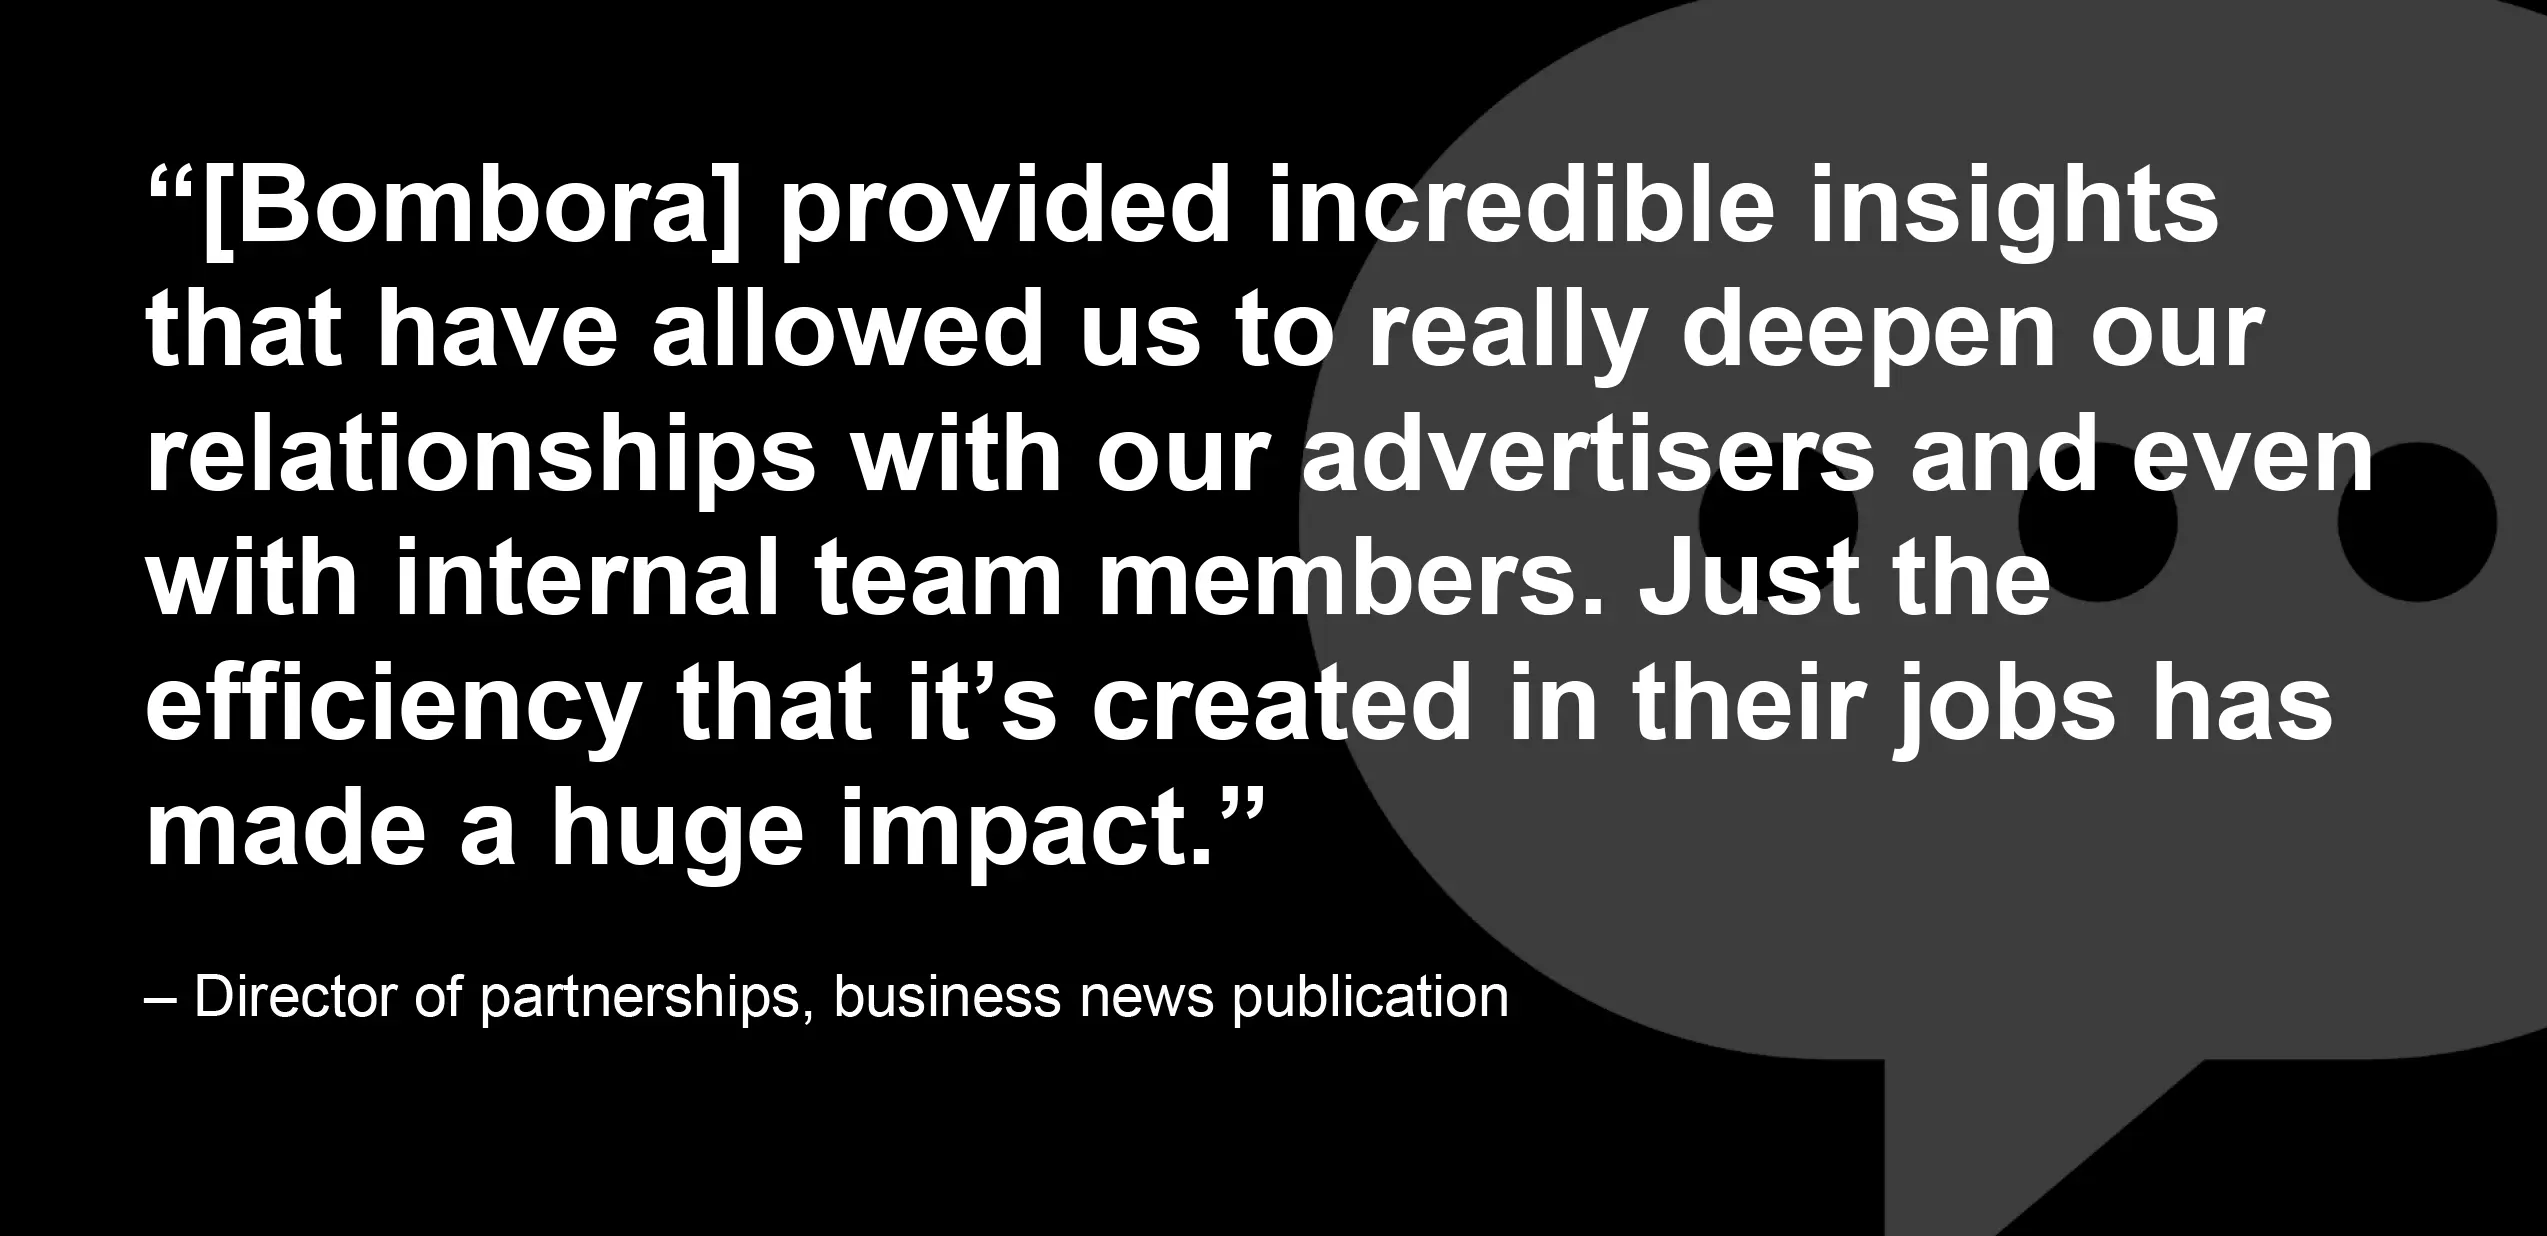 Publisher quote showcasing Bombora's ability to provide valuable insights for strengthening relationships with advertisers and internal team members, by improving job efficiency.